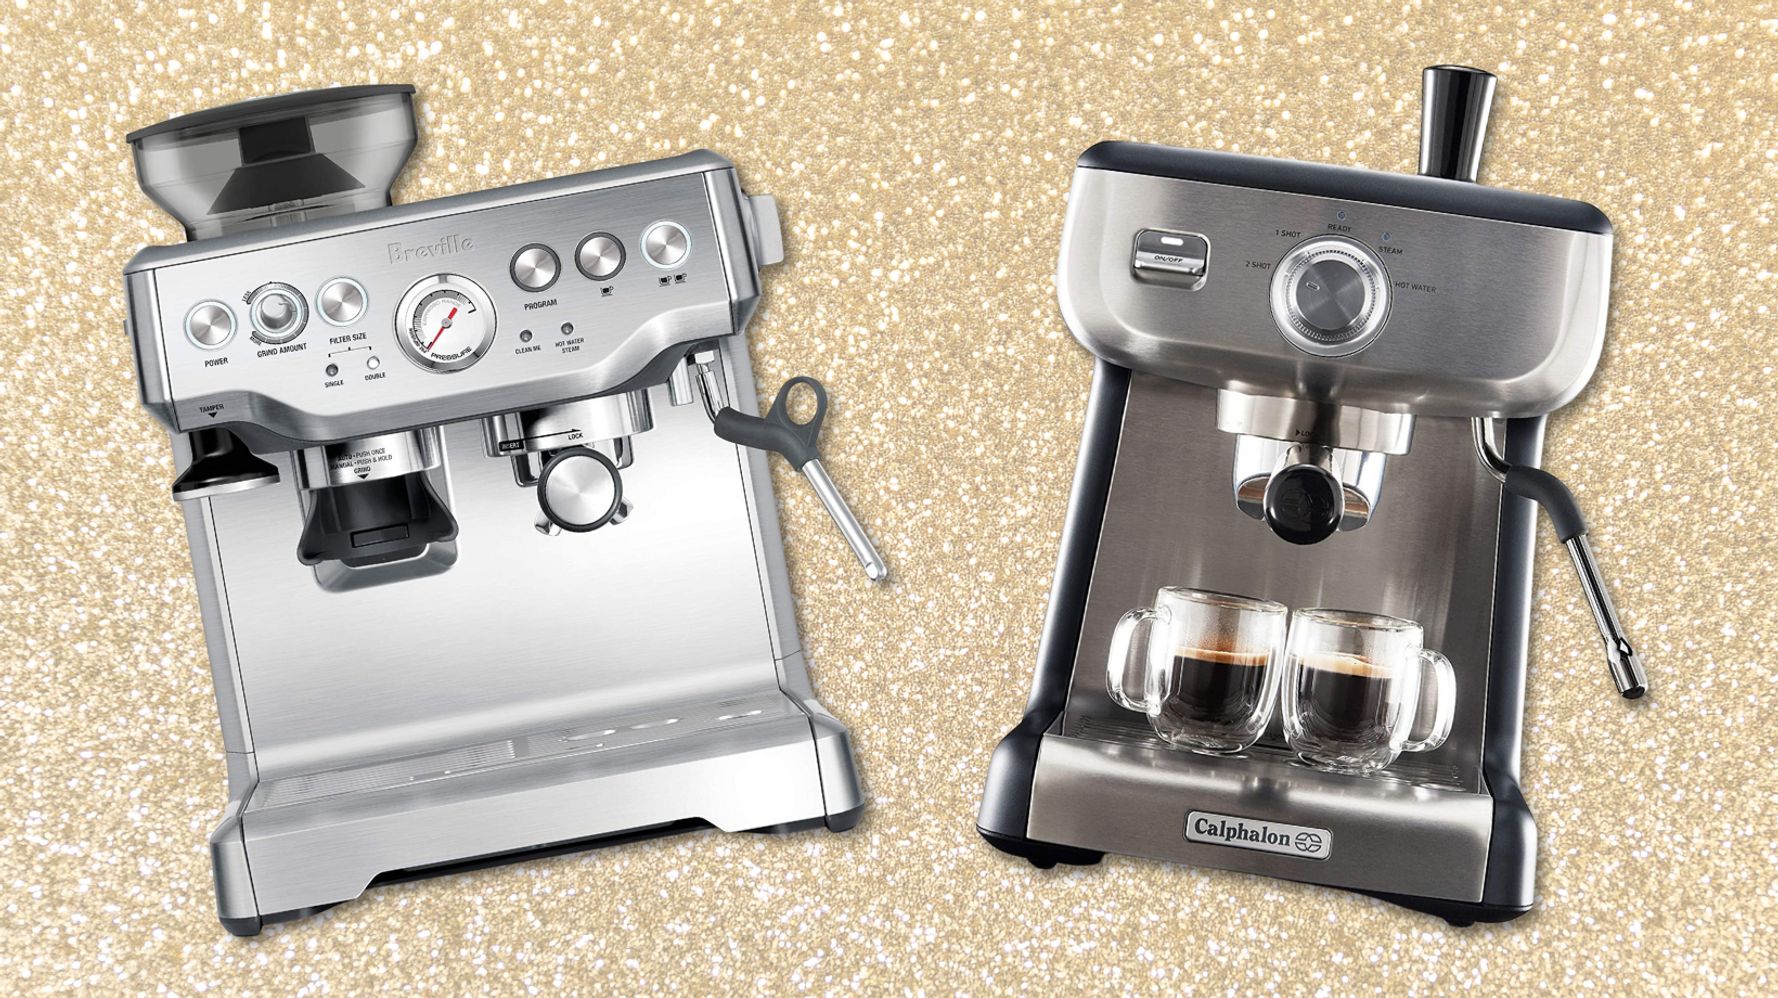 This holiday season, give the gift of Nespresso to your colleagues